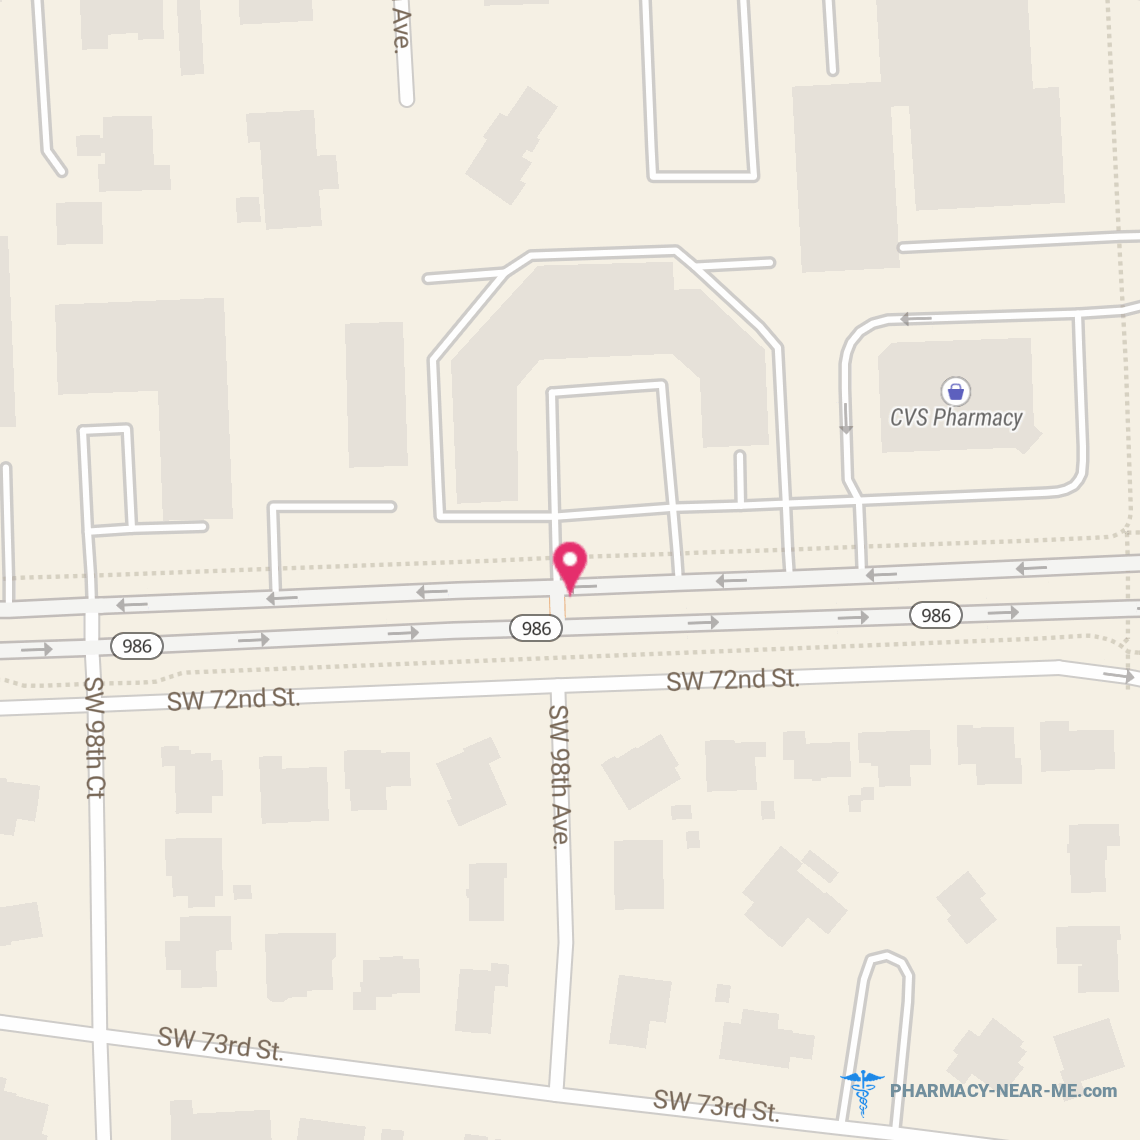 SENTRY DRUGS - Pharmacy Hours, Phone, Reviews & Information: 9783 Southwest 72nd Street, Miami, Florida 33173, United States